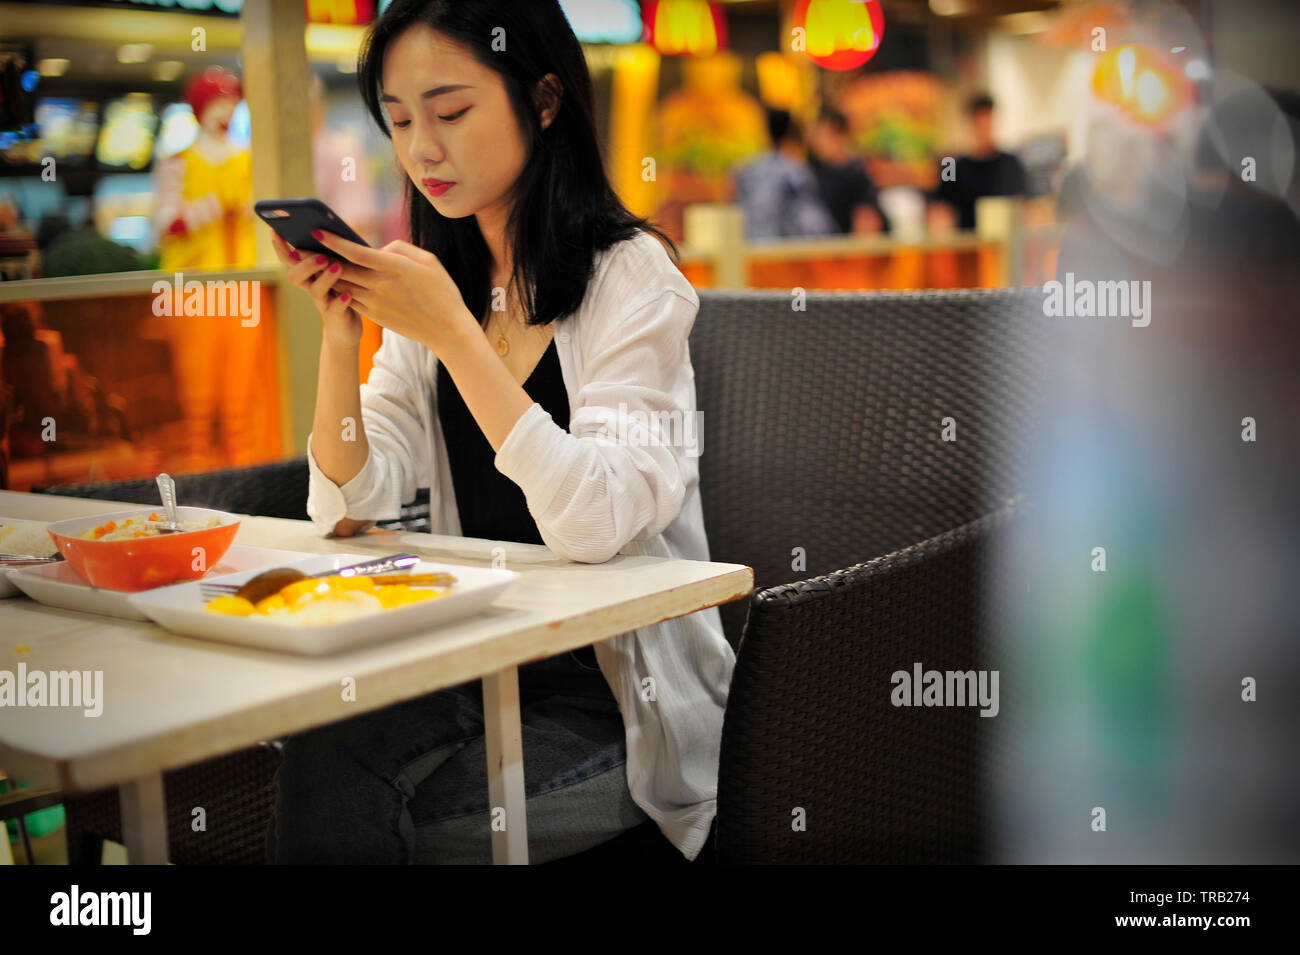 Chinese girl having lunch in Food Hall Central Festival Pattaya Thaïlande Banque D'Images